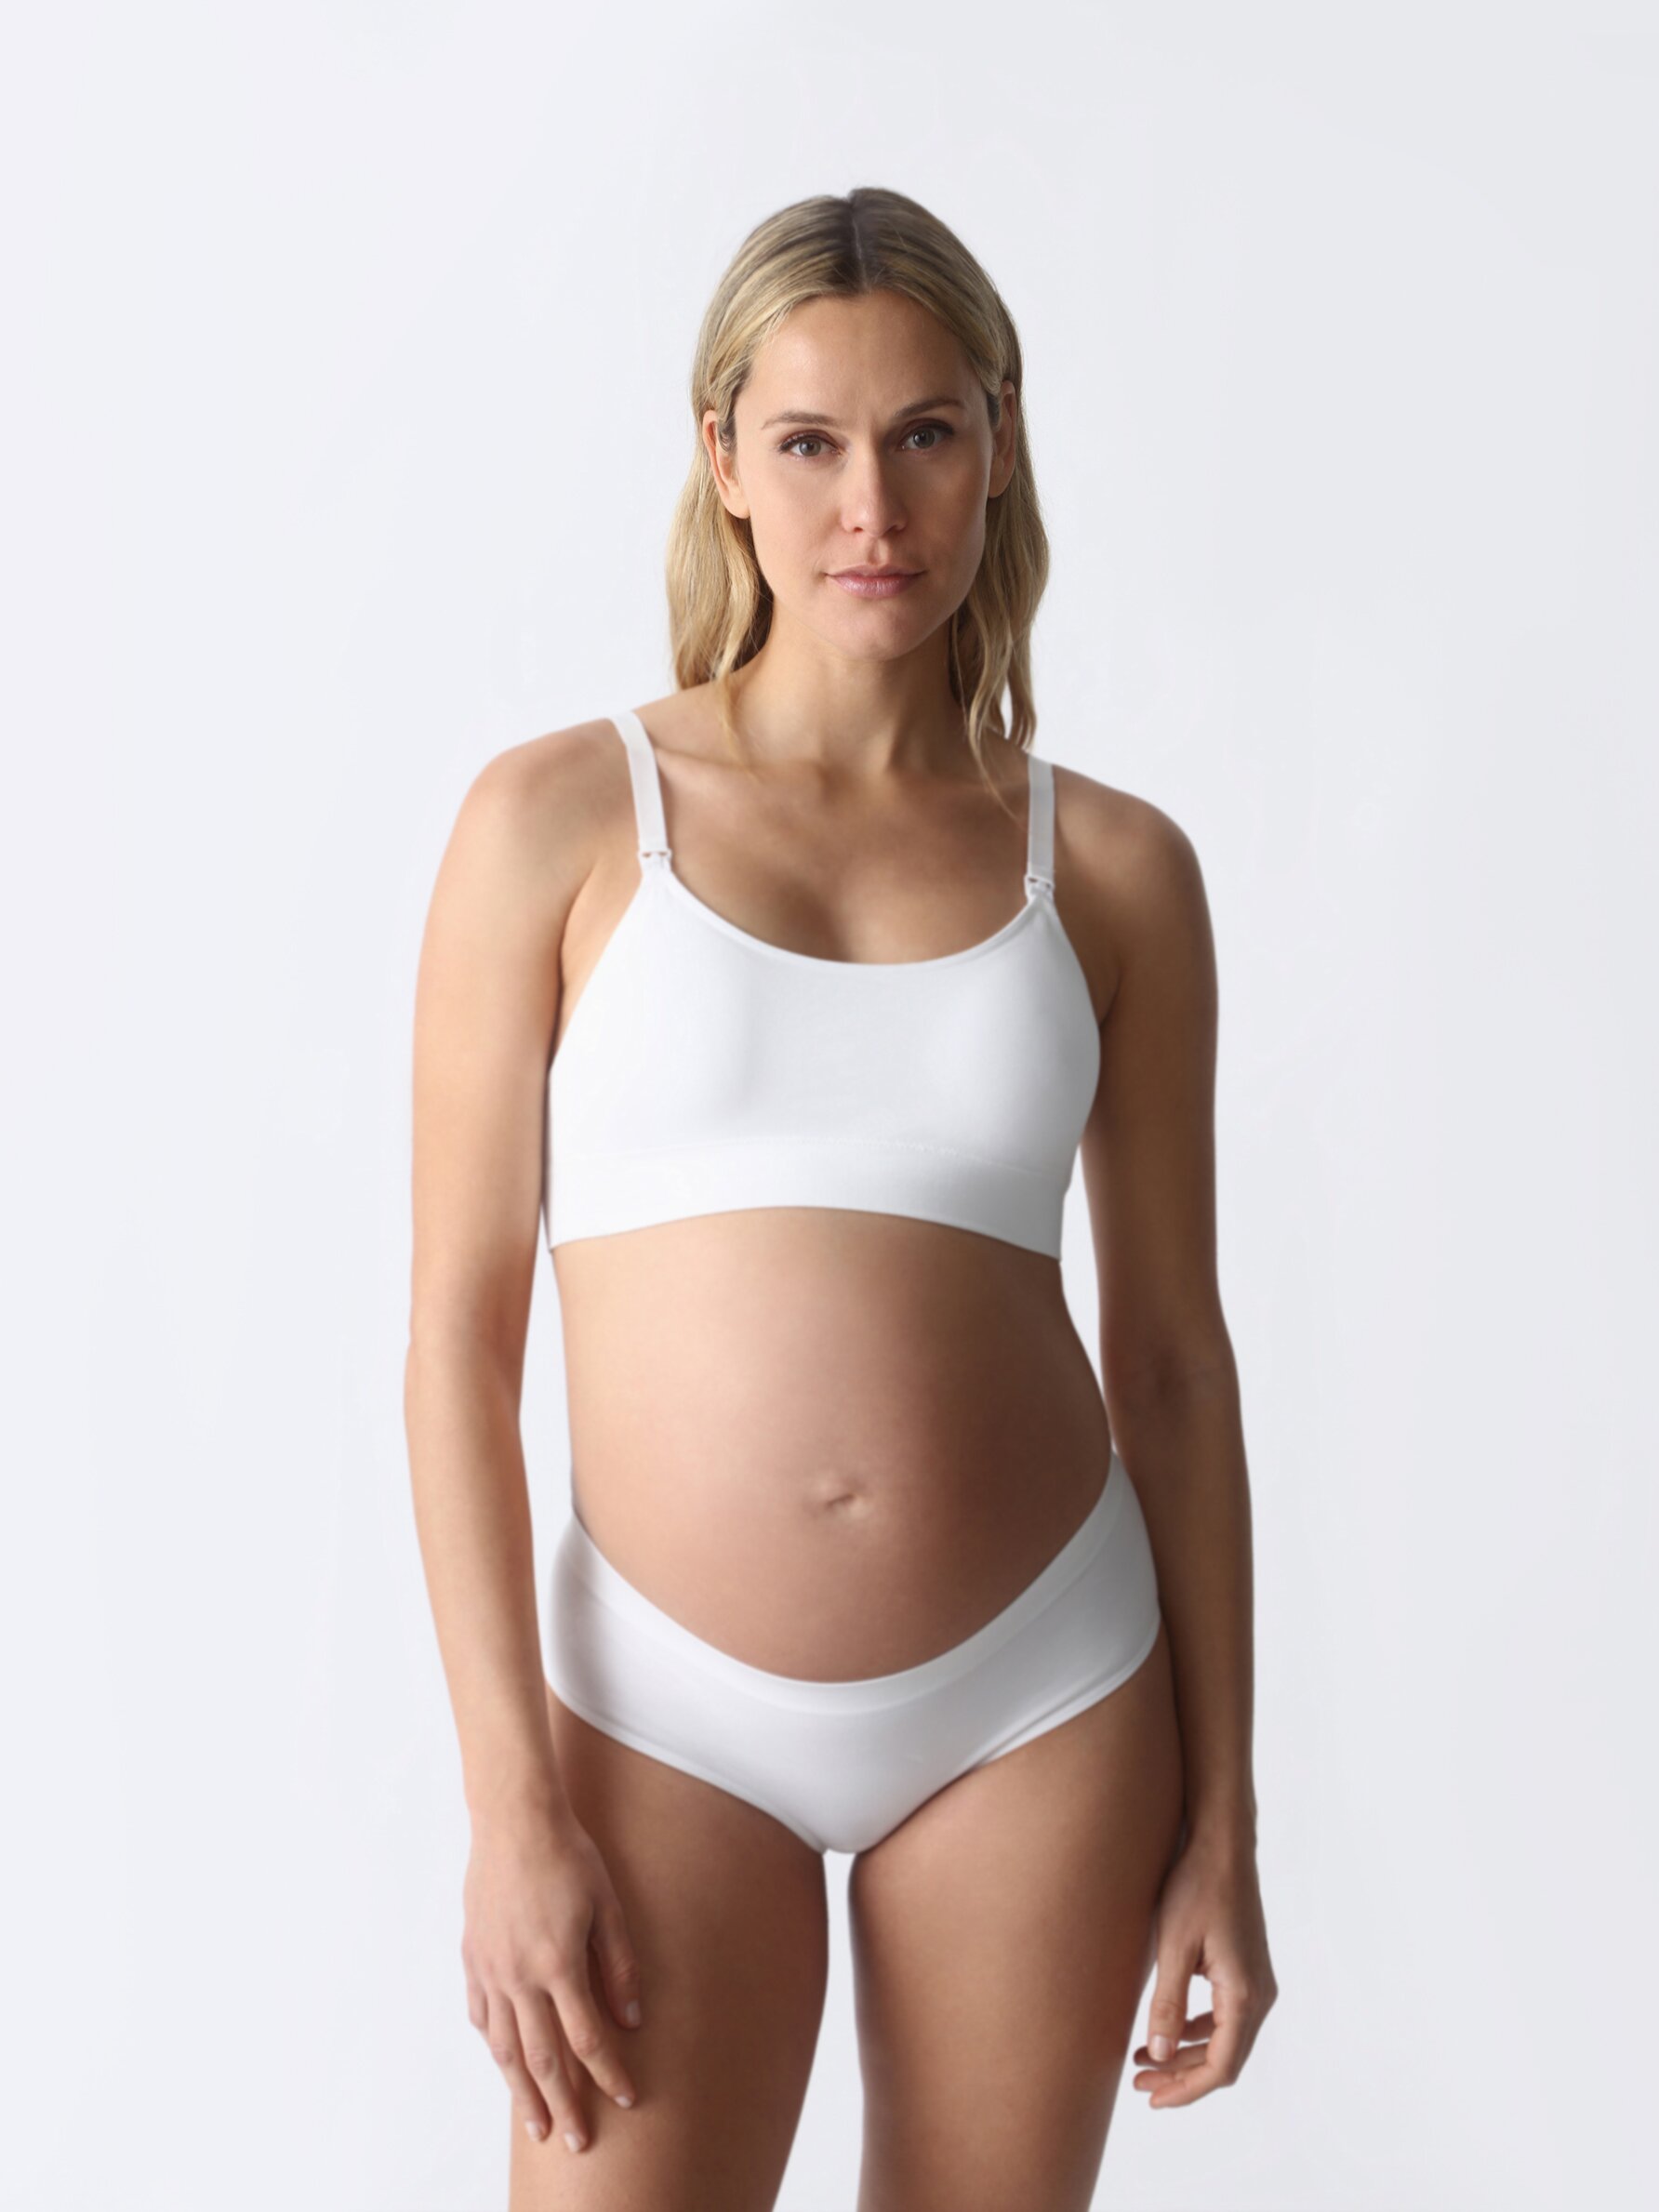 Pack of 2 seamless maternity briefs - Briefs - Underwear - CLOTHING - Woman  